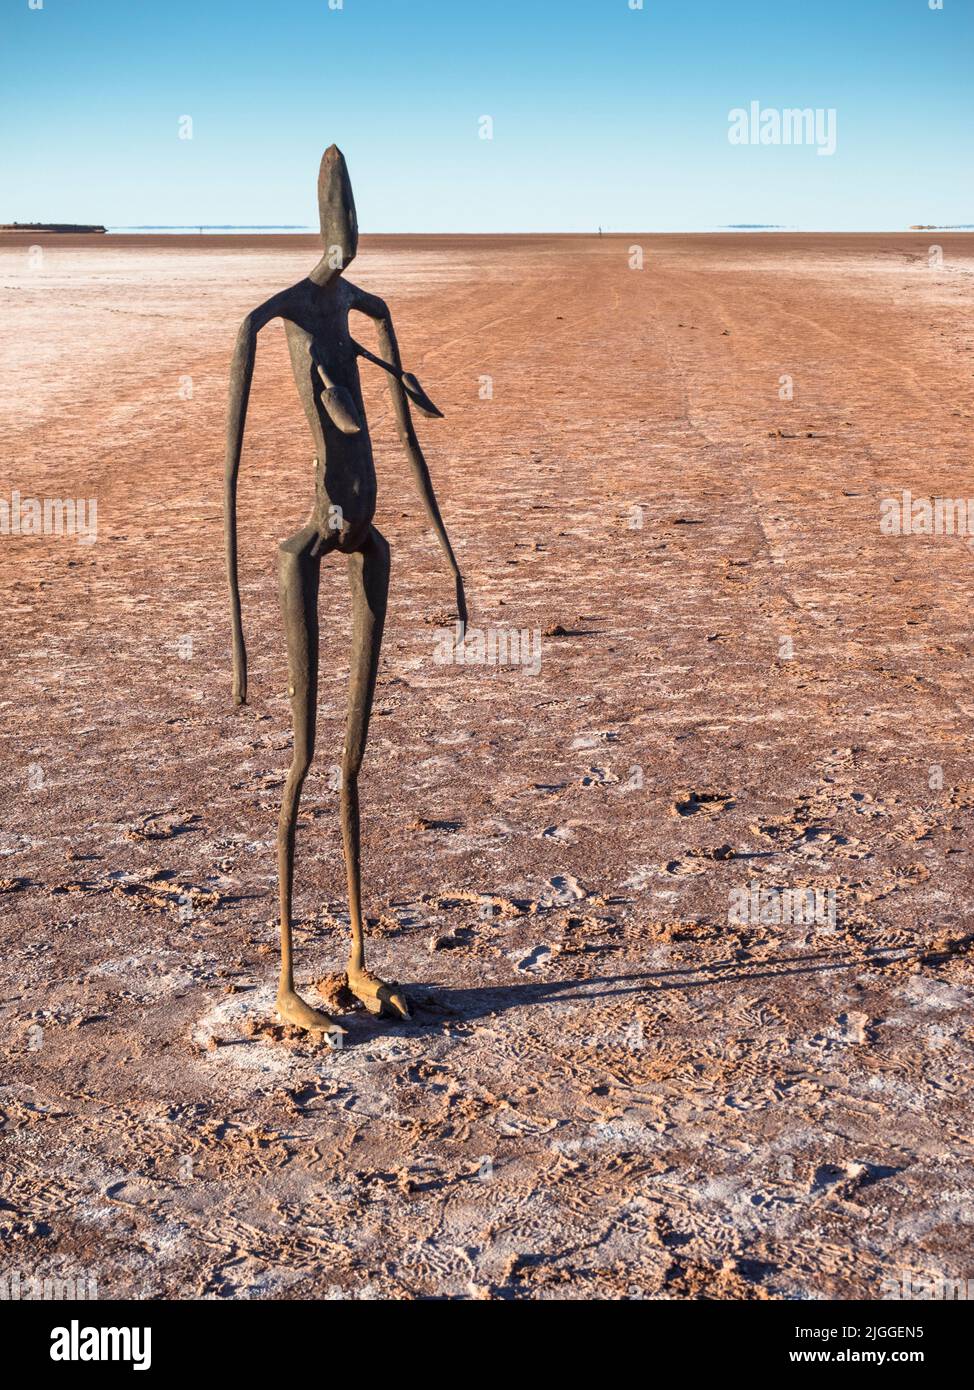 One of the Lake Ballard. "Salt People" - 51 metal-alloy sculptures by Sir  Antony Gormley (titled "Inside Australia") scattered around a dry salt lake  Stock Photo - Alamy